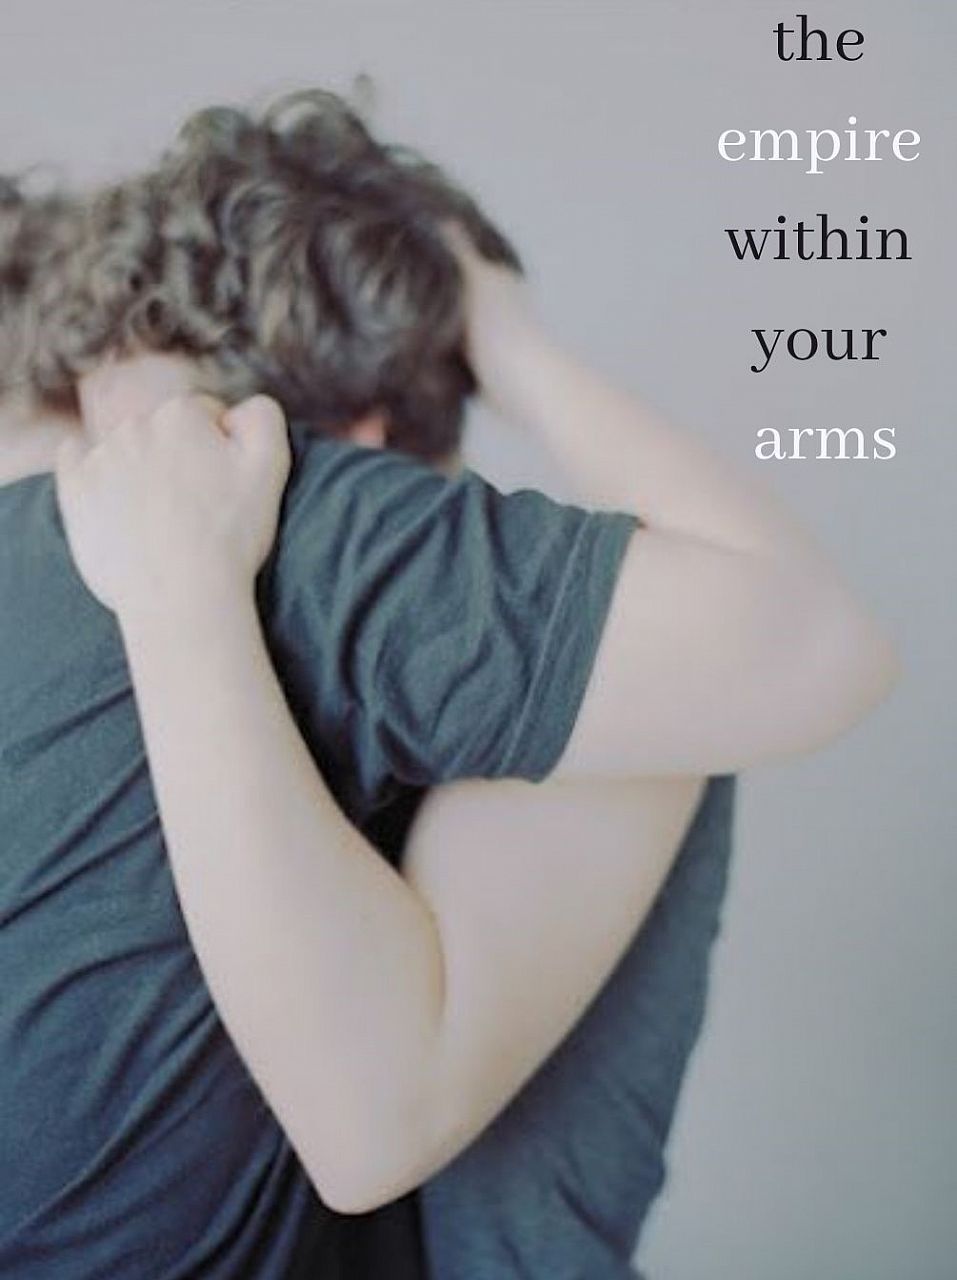 The empire within your arms